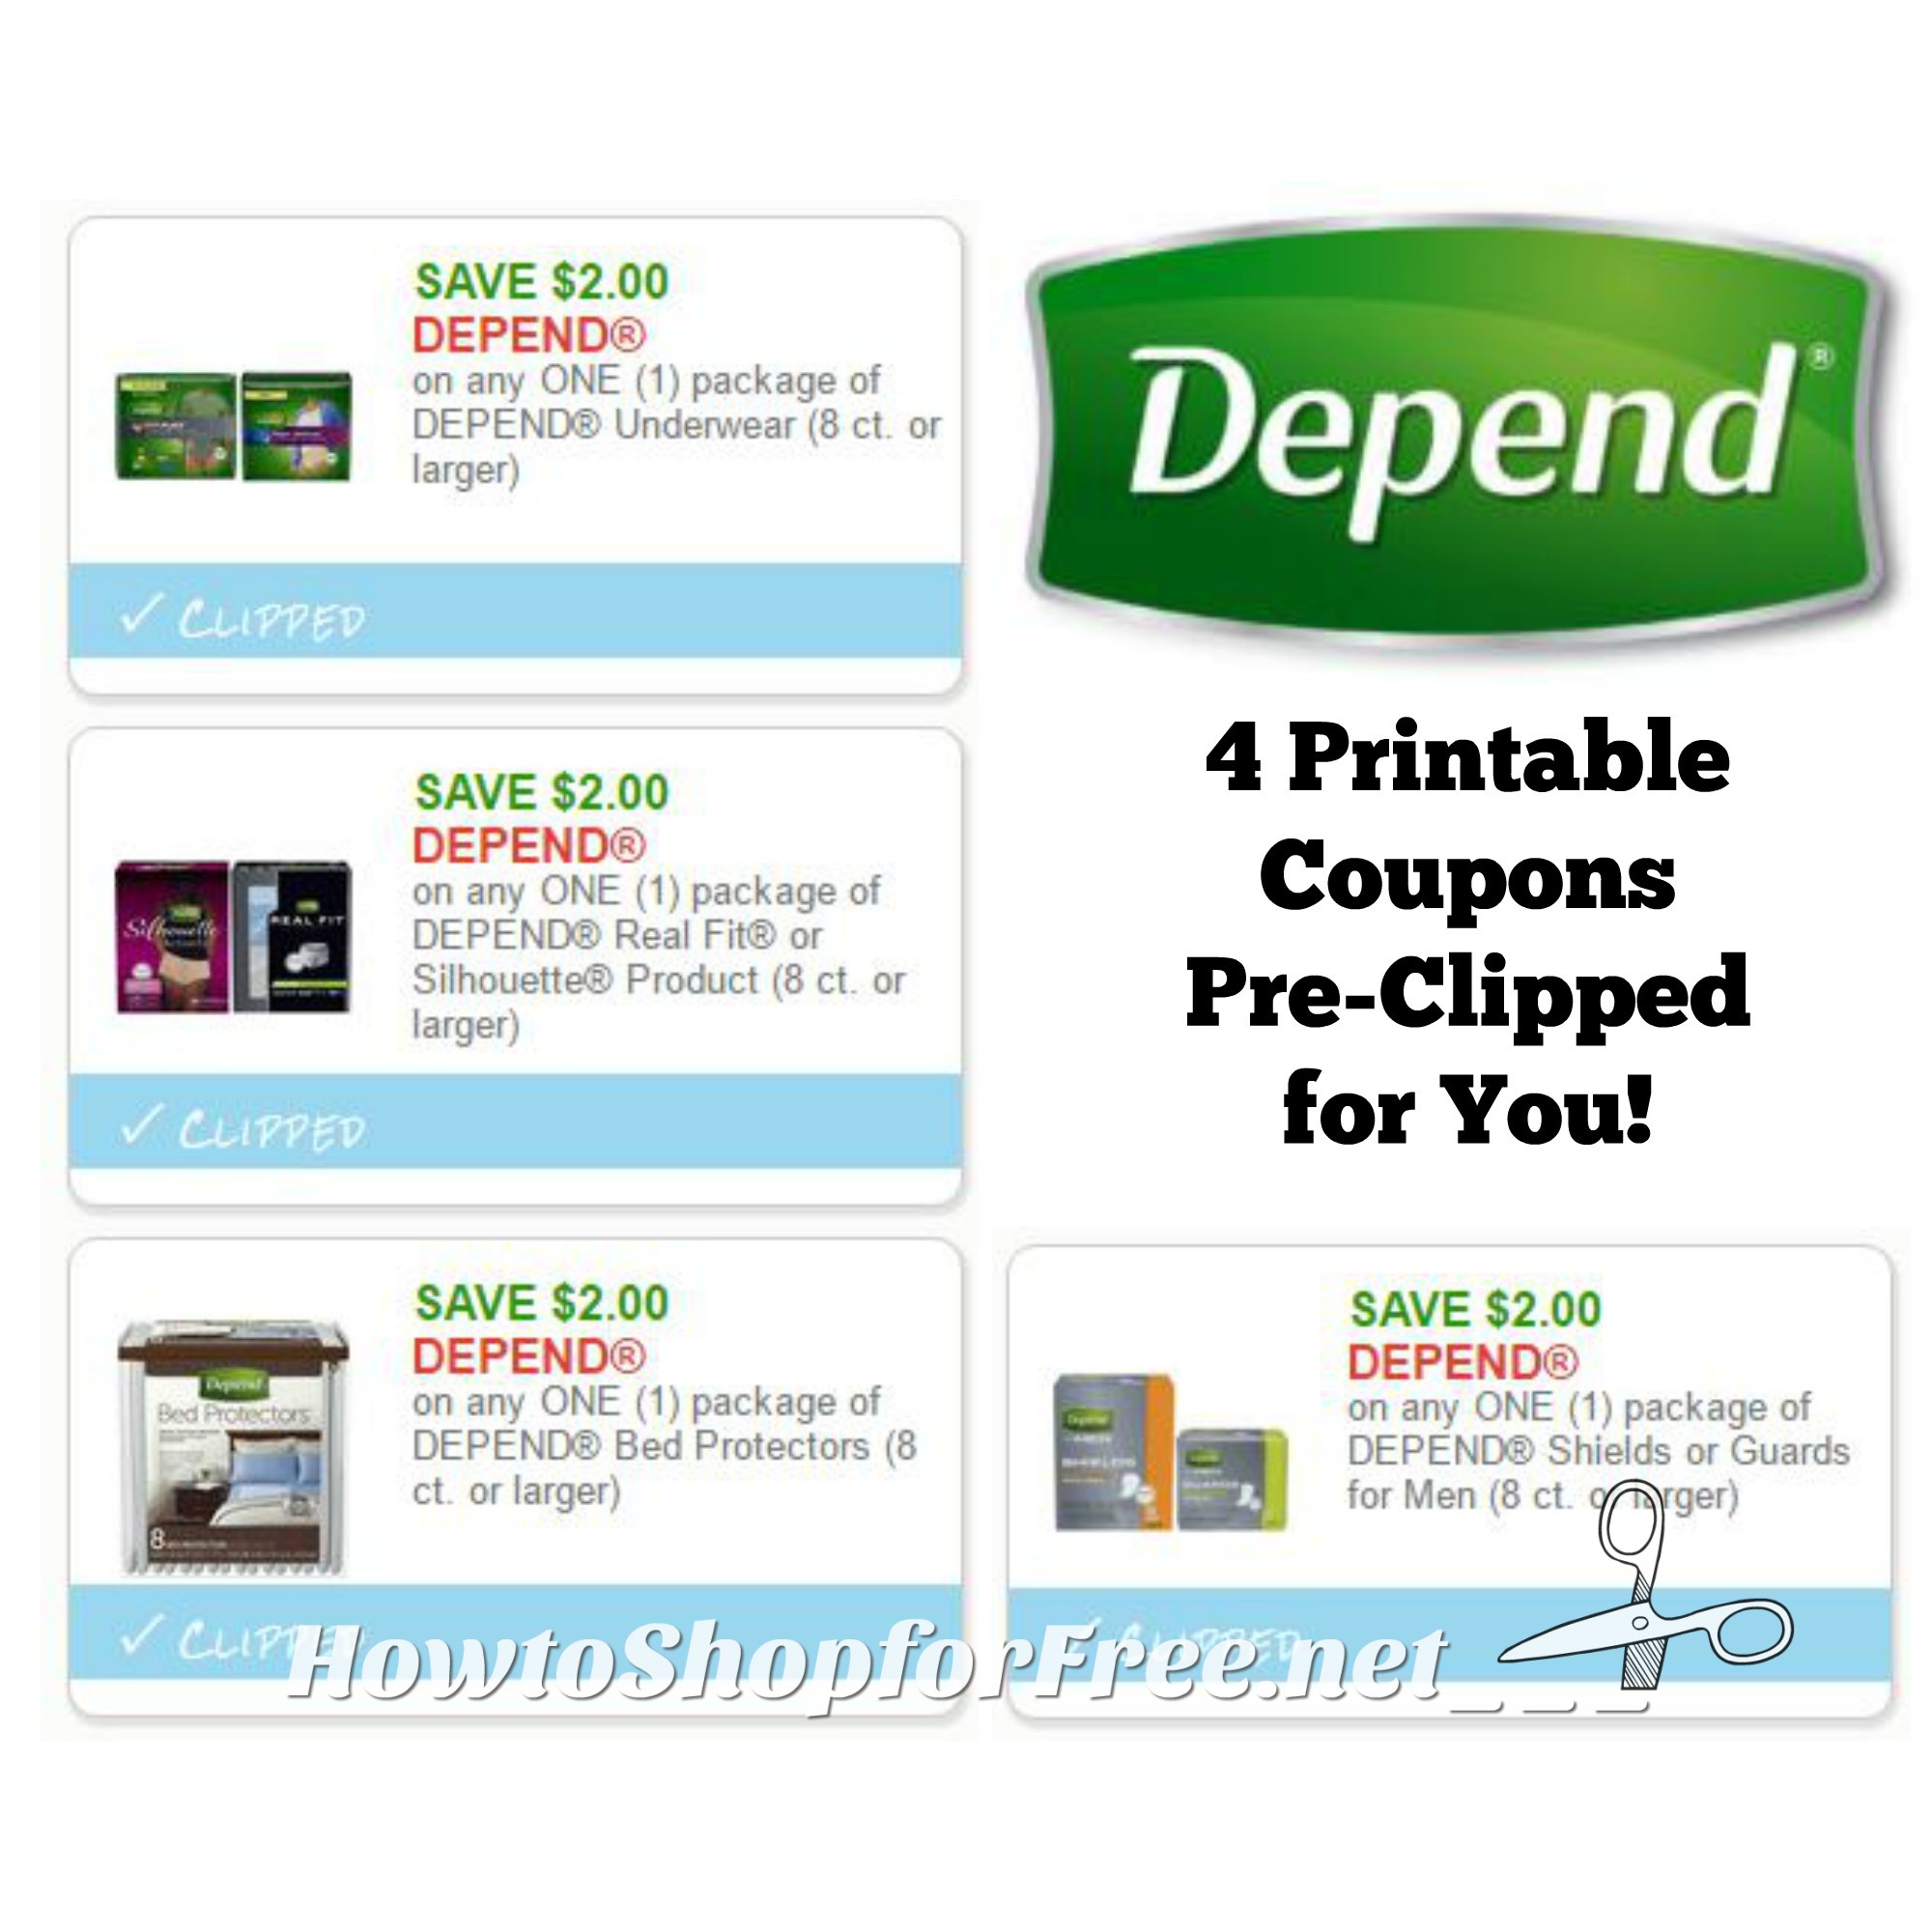 New Printable Coupons Four Depend Coupons Pre Clipped For You How To Shop For Free With Kathy Spencer